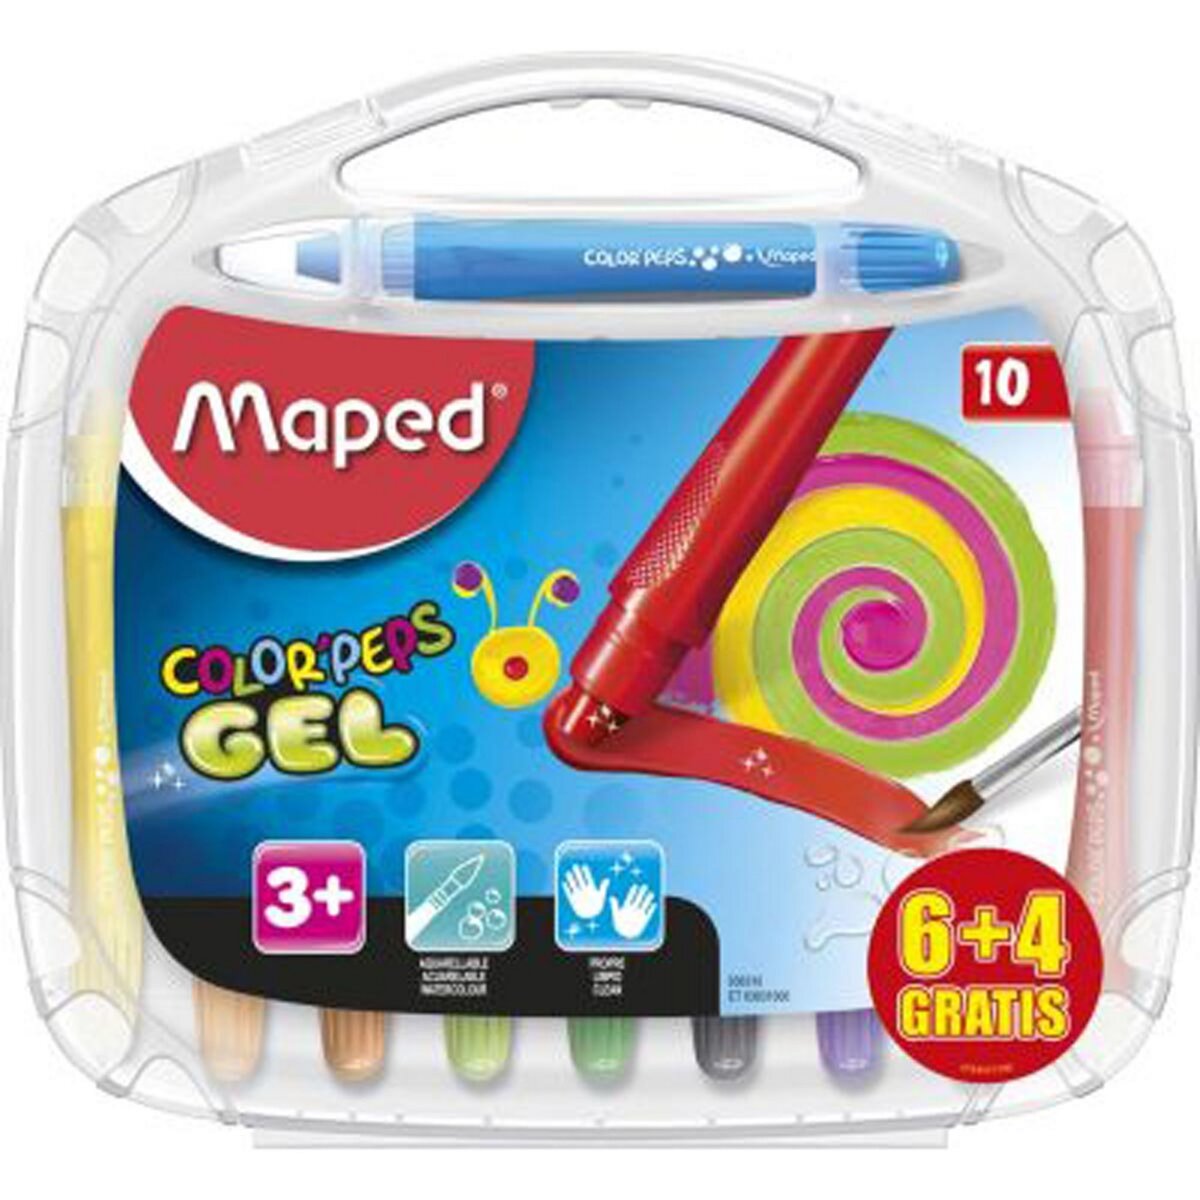 MAPED 6+4 crayons gel color peps